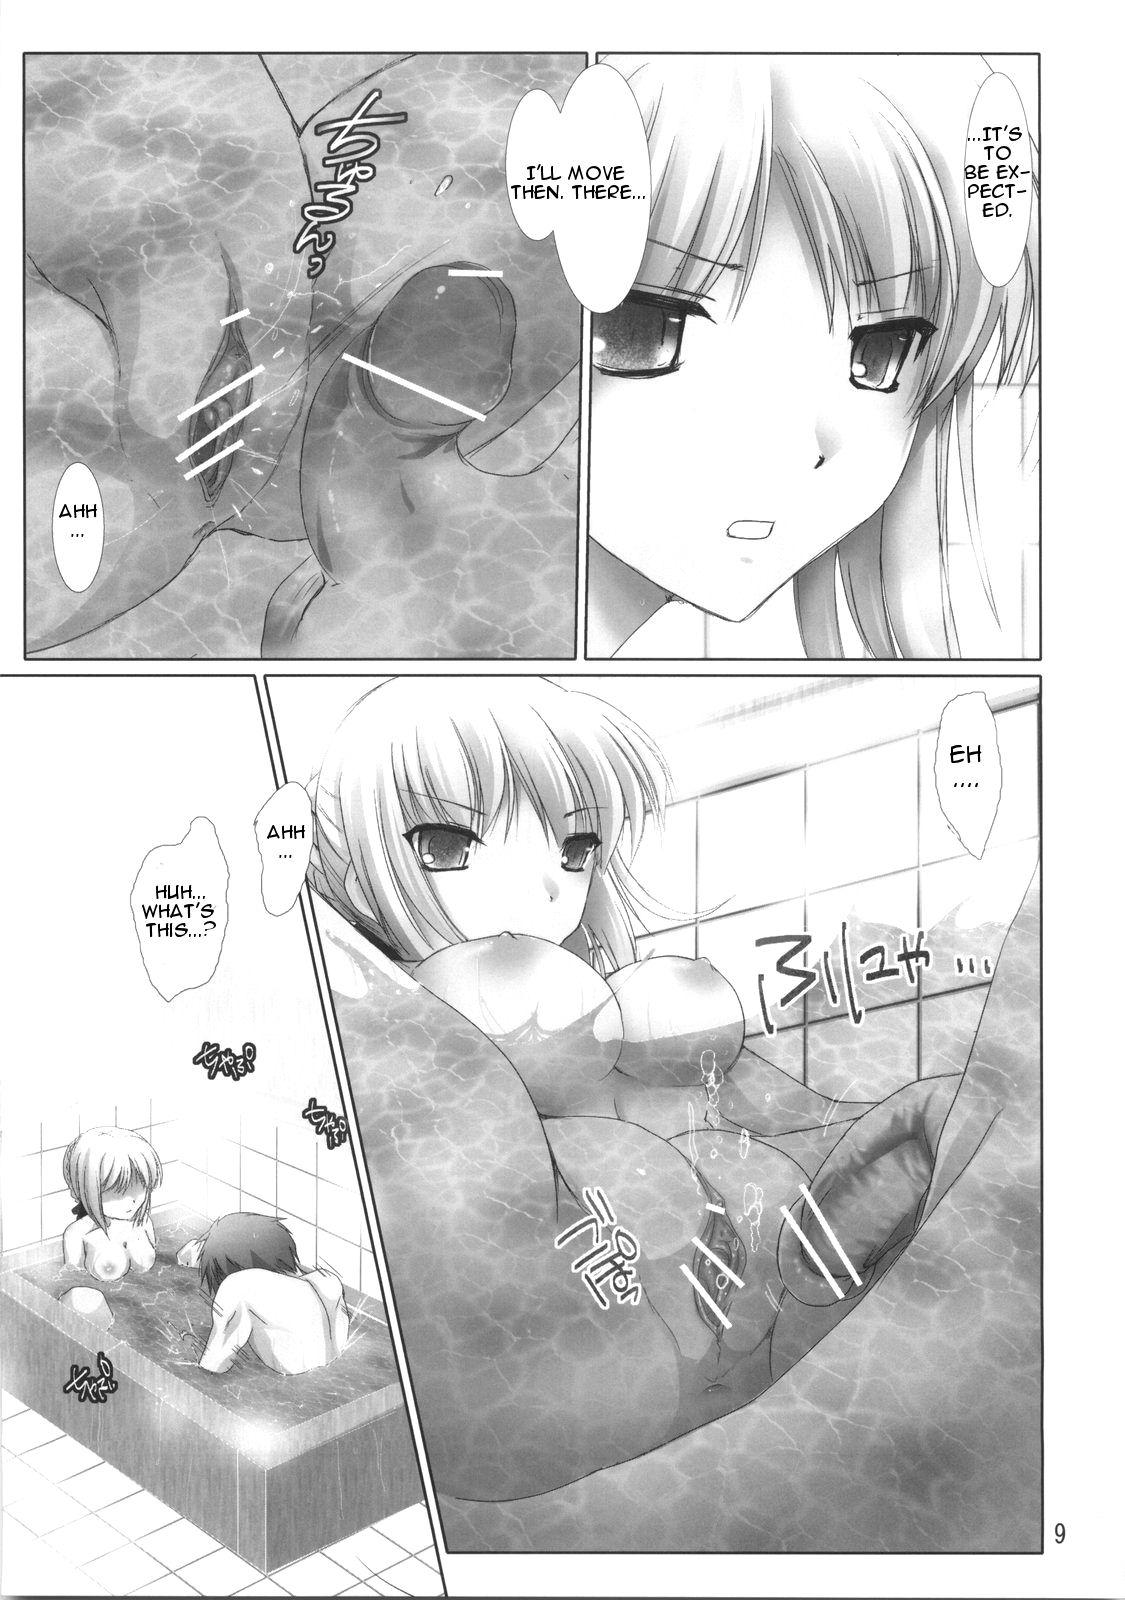 Stretching BLACK 99% - Fate stay night Fate hollow ataraxia Gostosa - Page 8